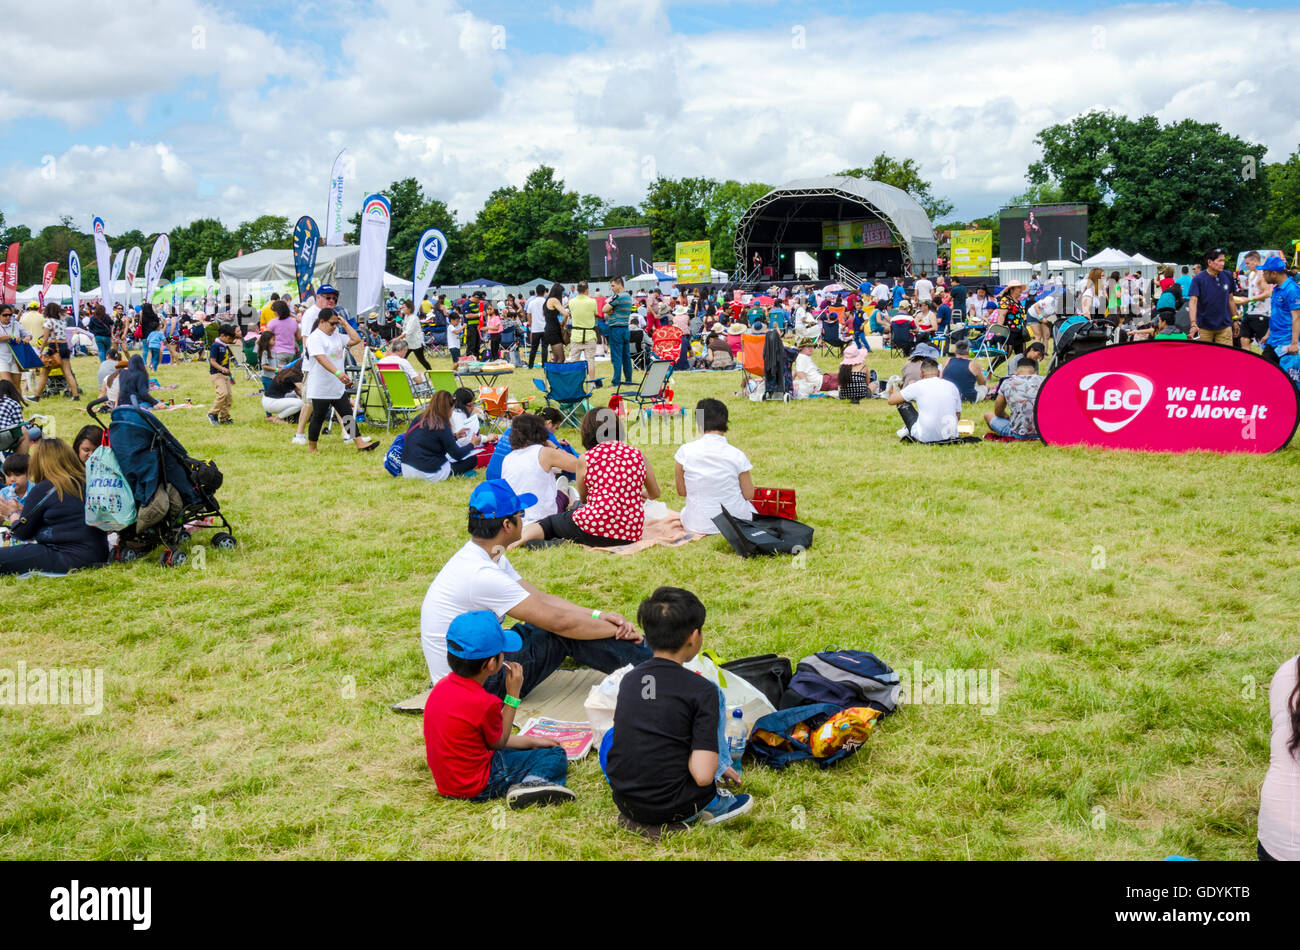 Looking across a crowd of people at the stage at The Barrio Fiesta 2016 in London. Stock Photo